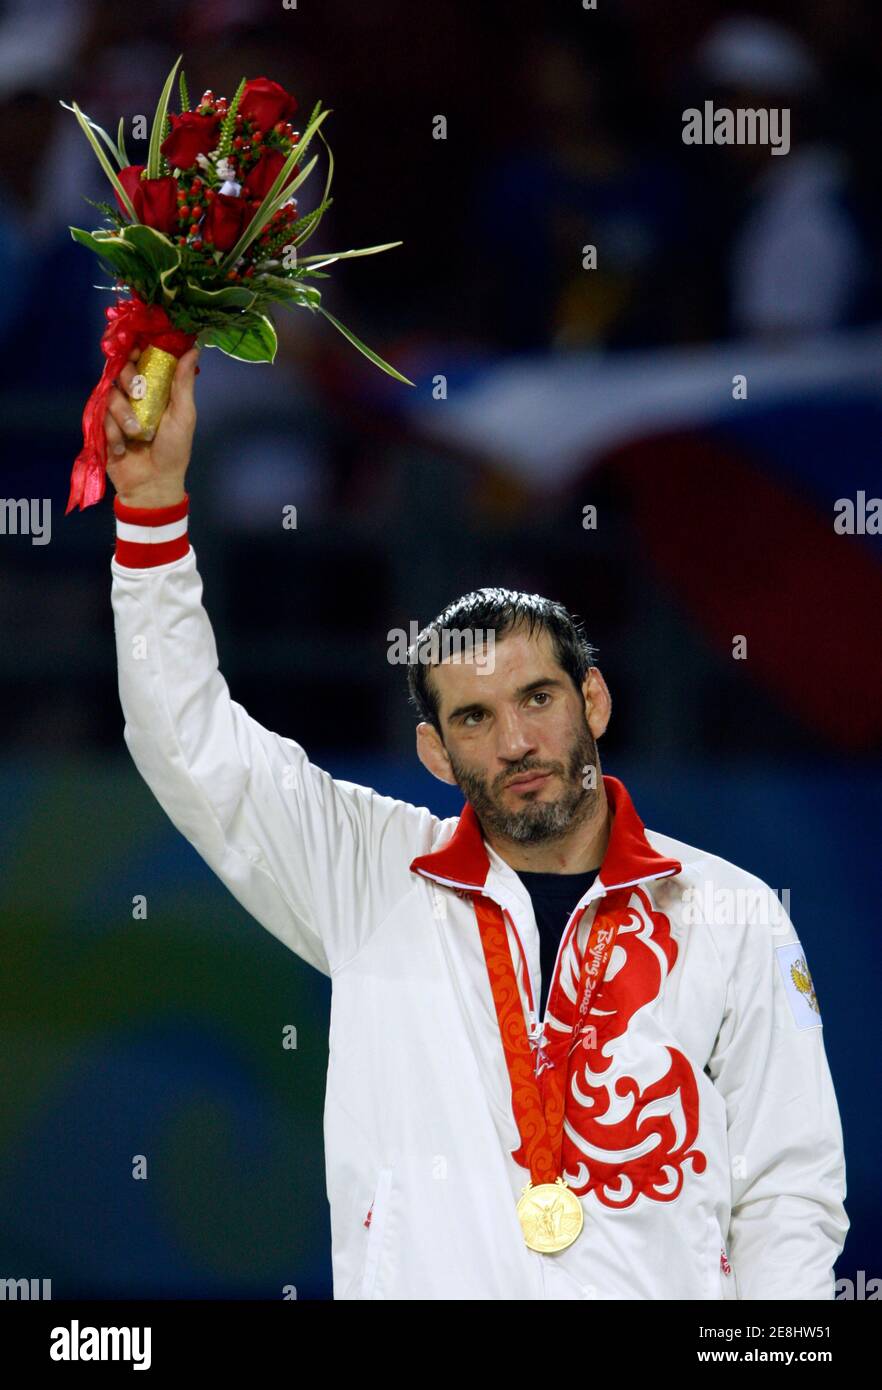 Buvaysa Saytiev of Russia poses with his gold medal in the 74kg men's freestyle wrestling at the Beijing 2008 Olympic Games August 20, 2008.     REUTERS/Oleg Popov (CHINA) Stock Photo